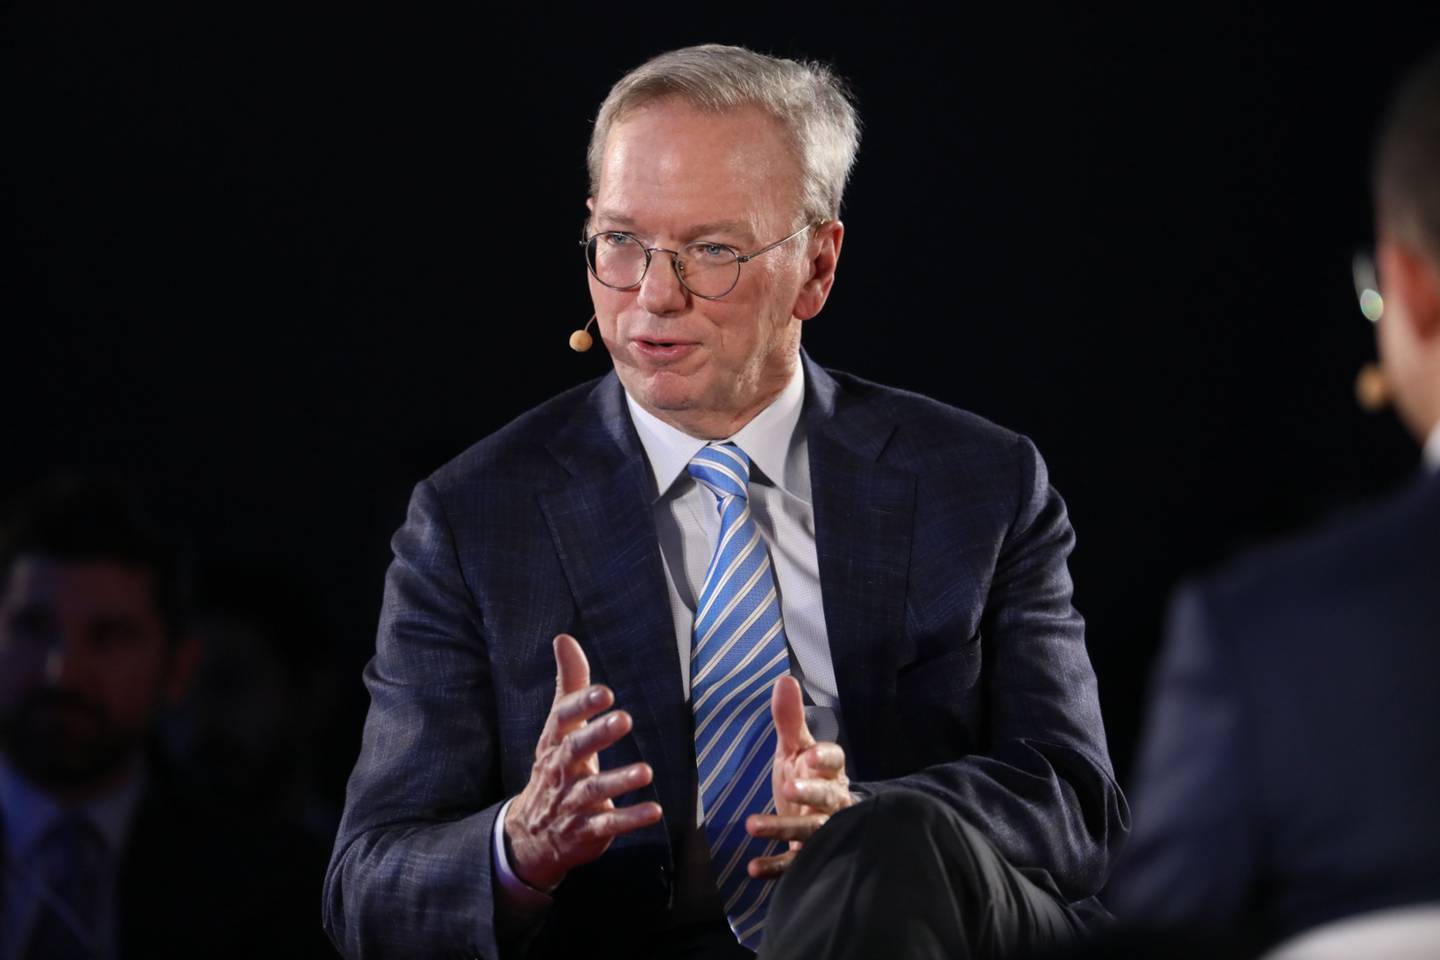 Eric Schmidt, technical advisor at Alphabet Inc., speaks during a panel discussion at the Bloomberg New Economy Forum in Beijing, China, on Friday, Nov. 22, 2019.